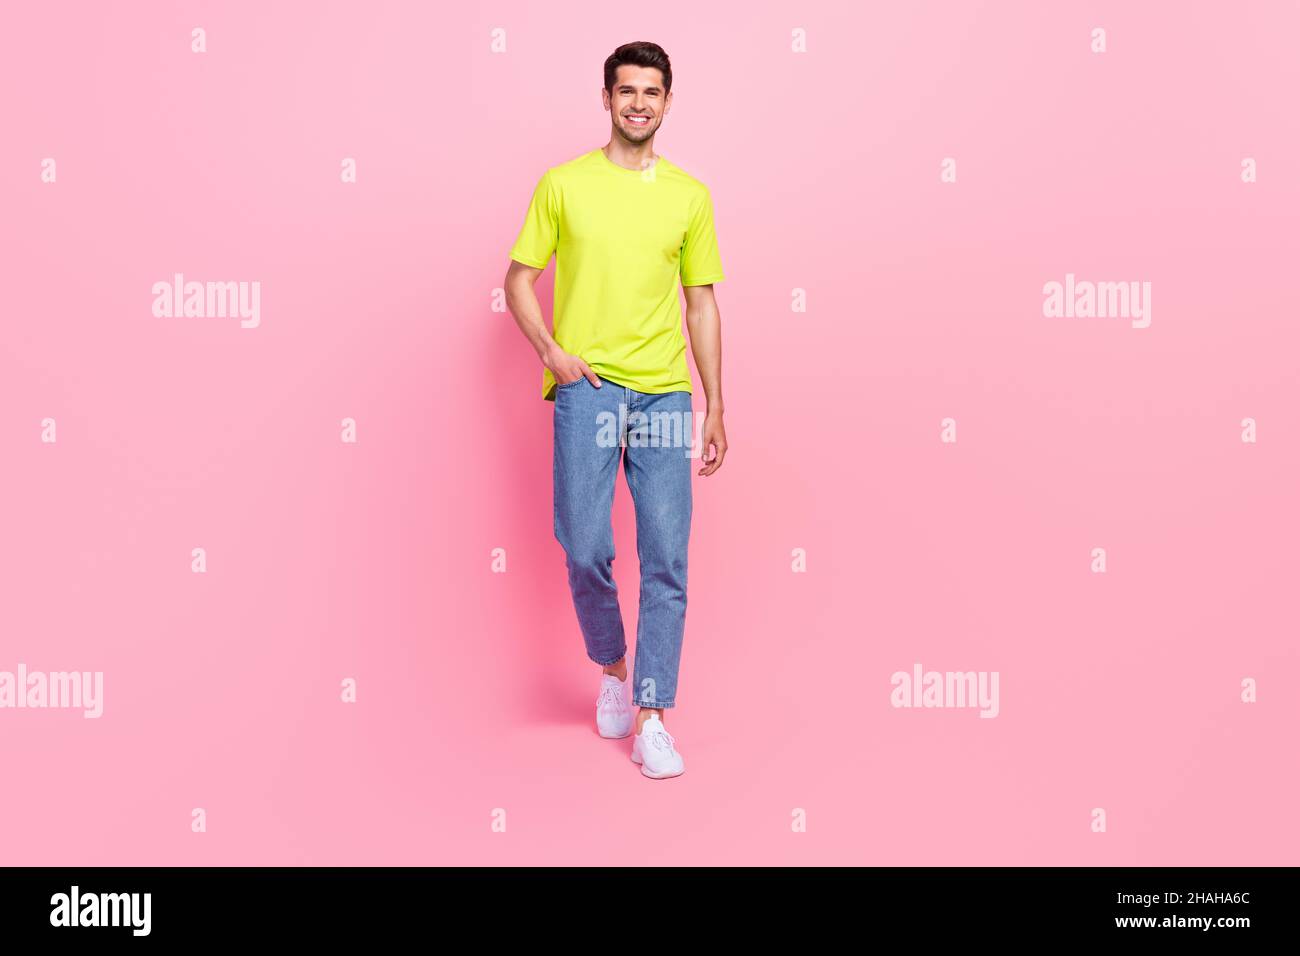 Full length body size photo man confident smiling in stylish outfit walking forward isolated pastel pink color background Stock Photo